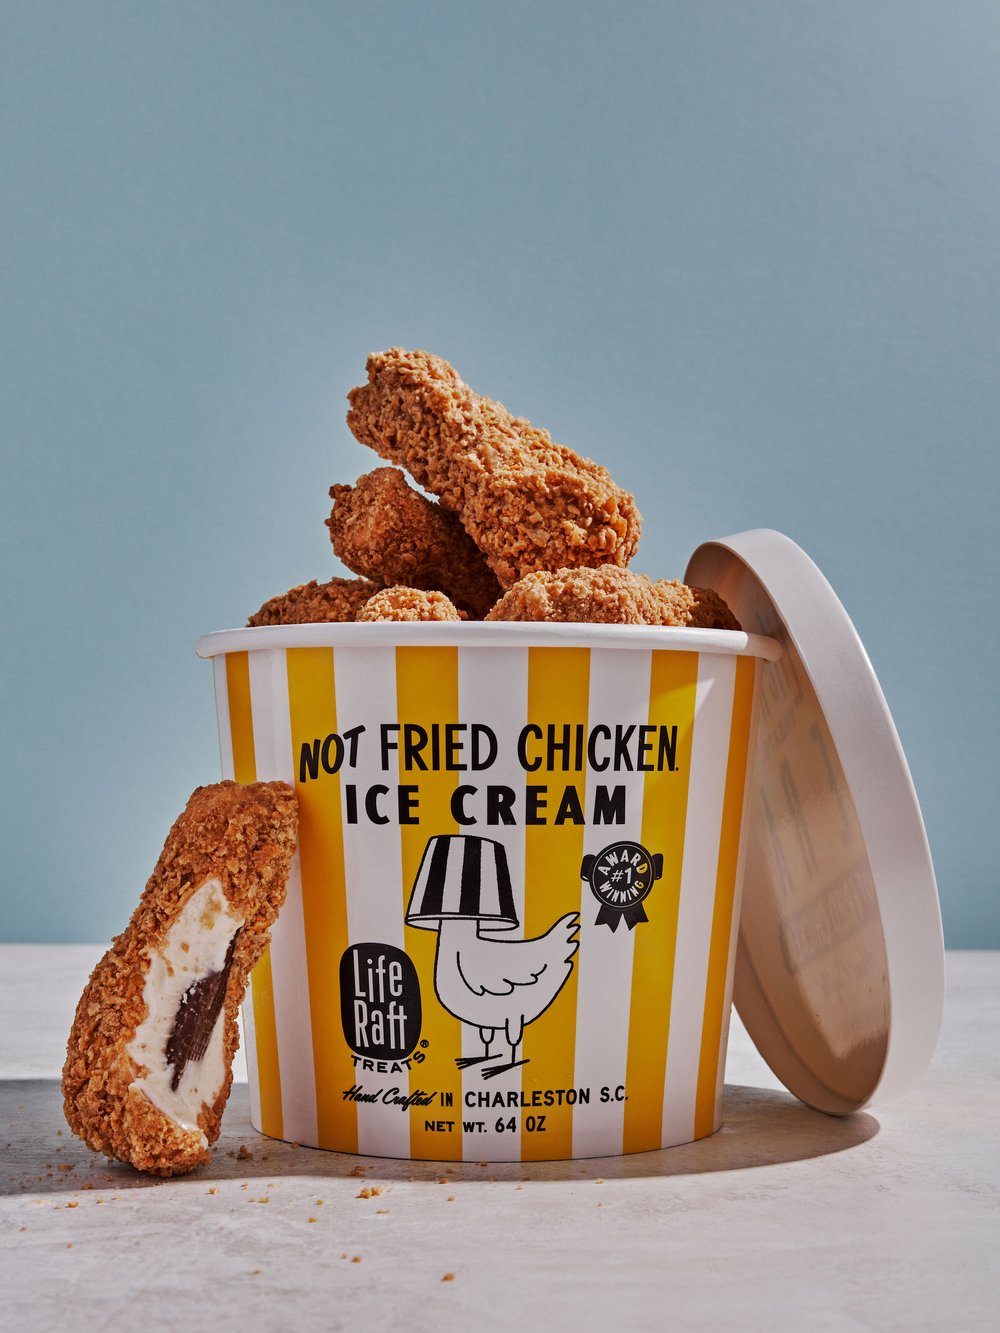 Where can I buy Not Fried Chicken ice cream? And how much for a bucket